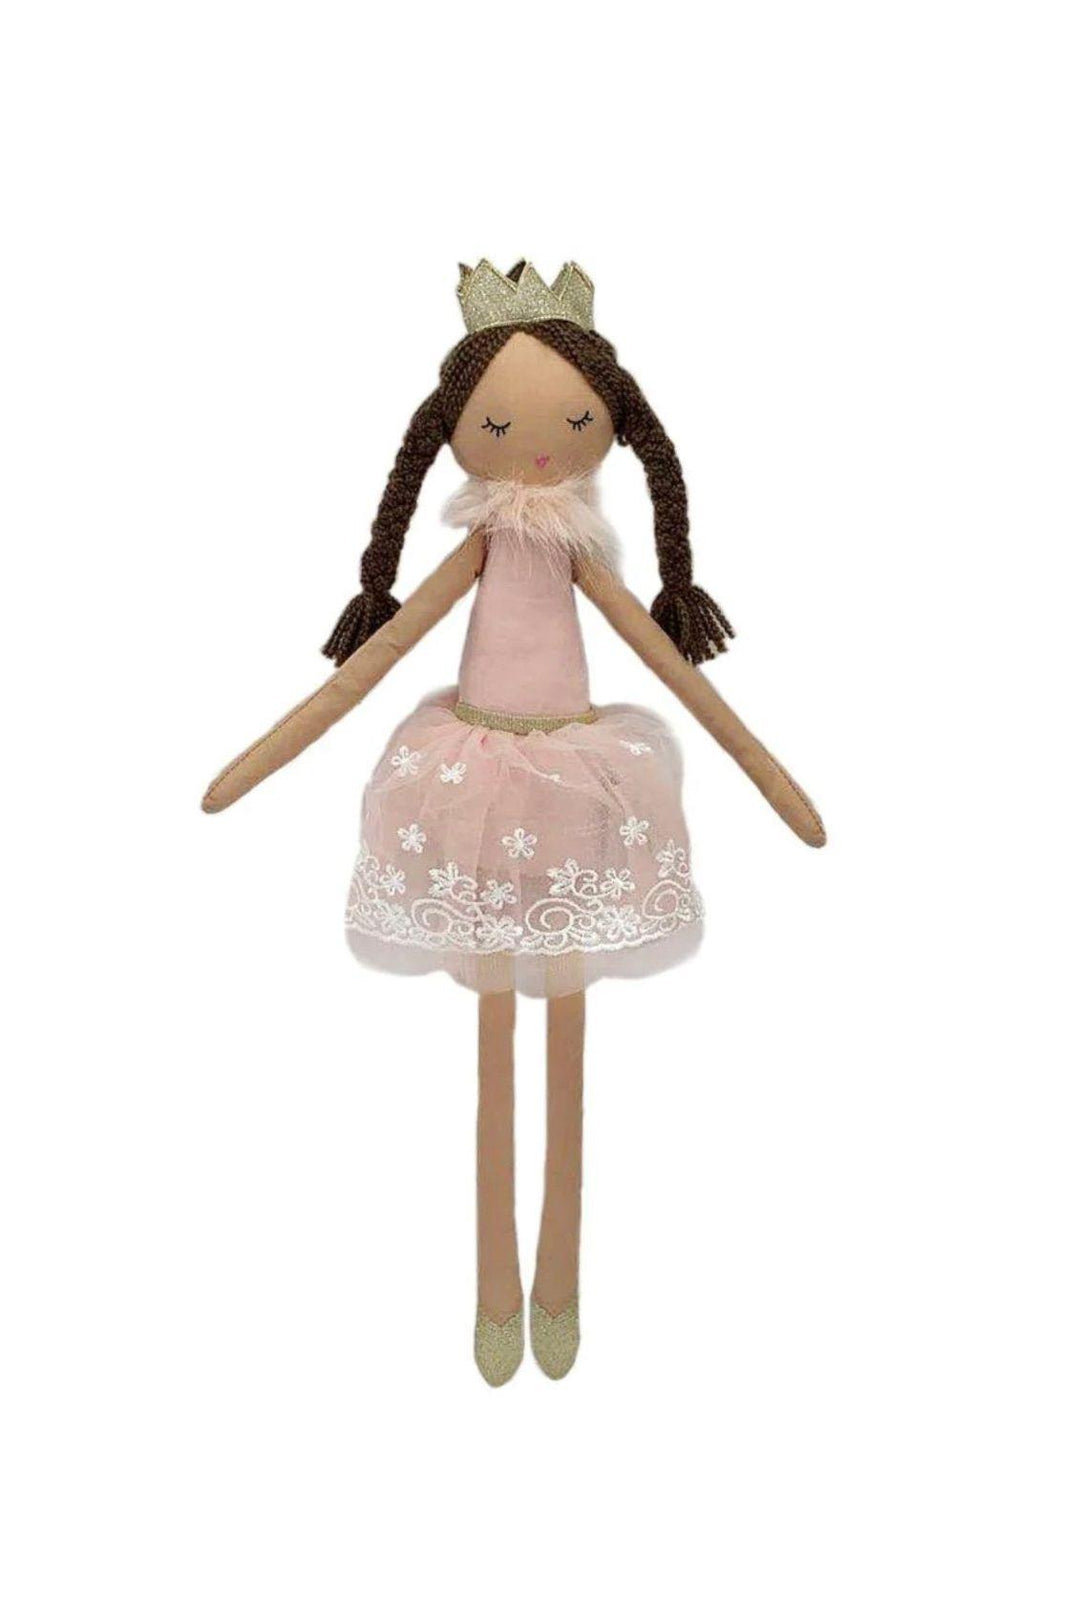 22-Inch Paige the Princess Doll - Pink Eyelet Dress & Gold Crown - Sophia Rose Children's Boutique